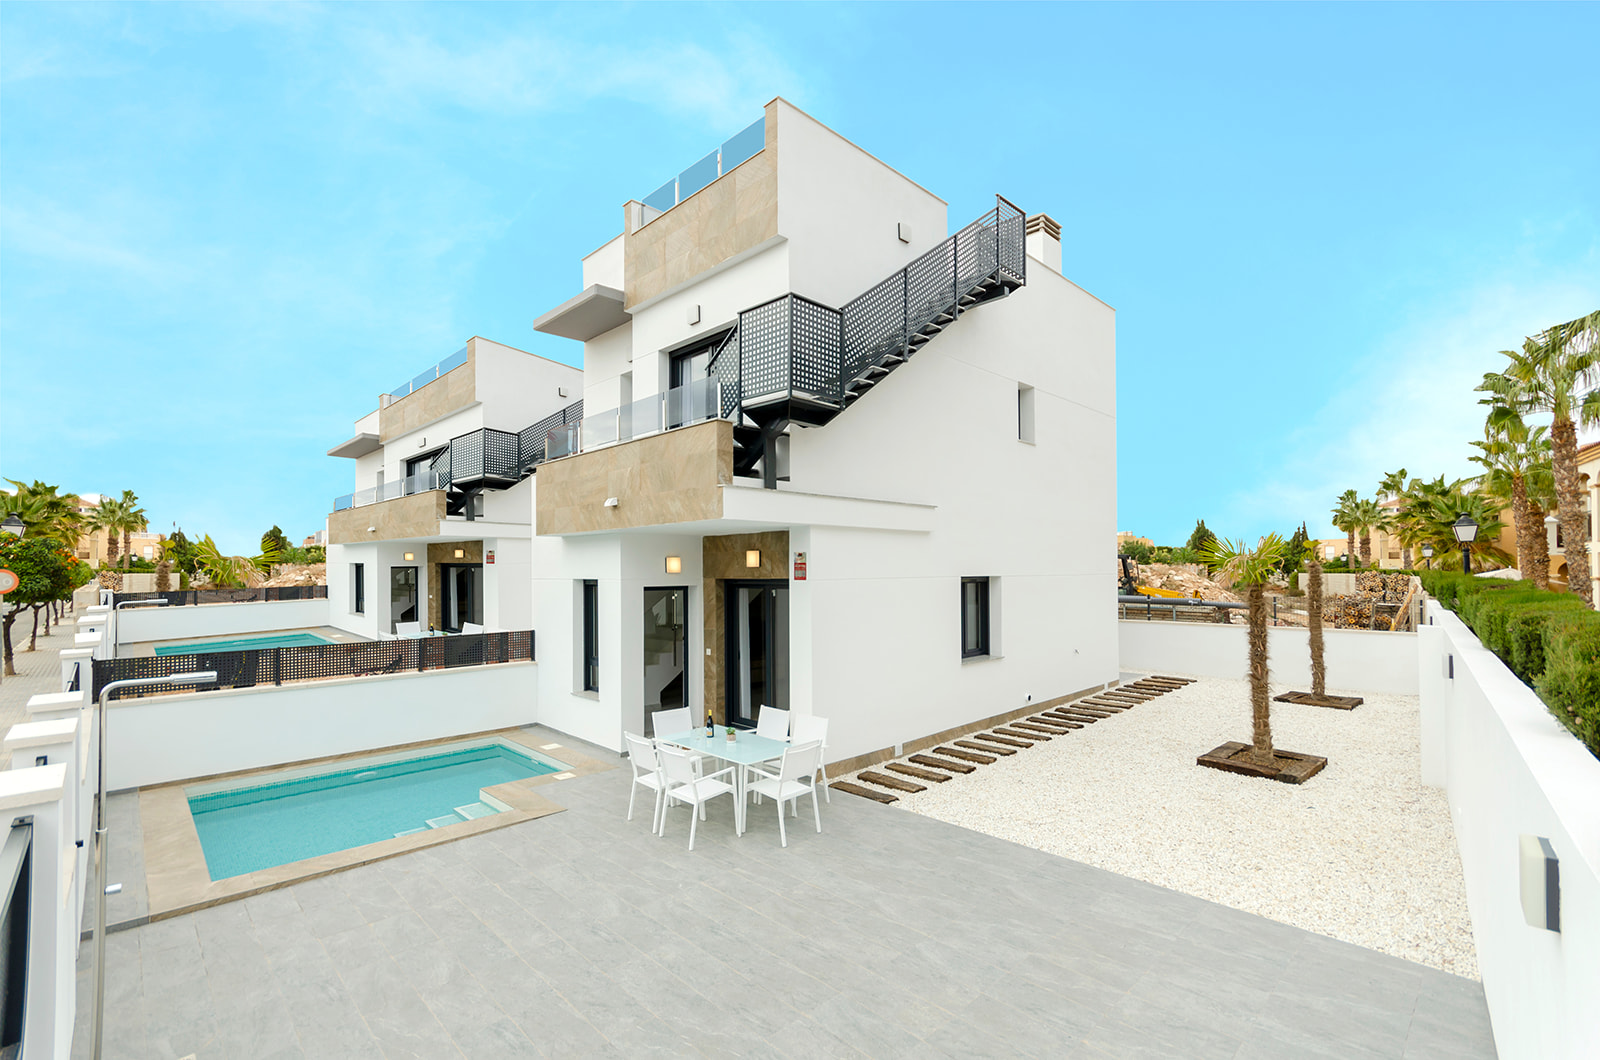 New build villas for sale in a residential area near the salt lakes in Torrevieja.